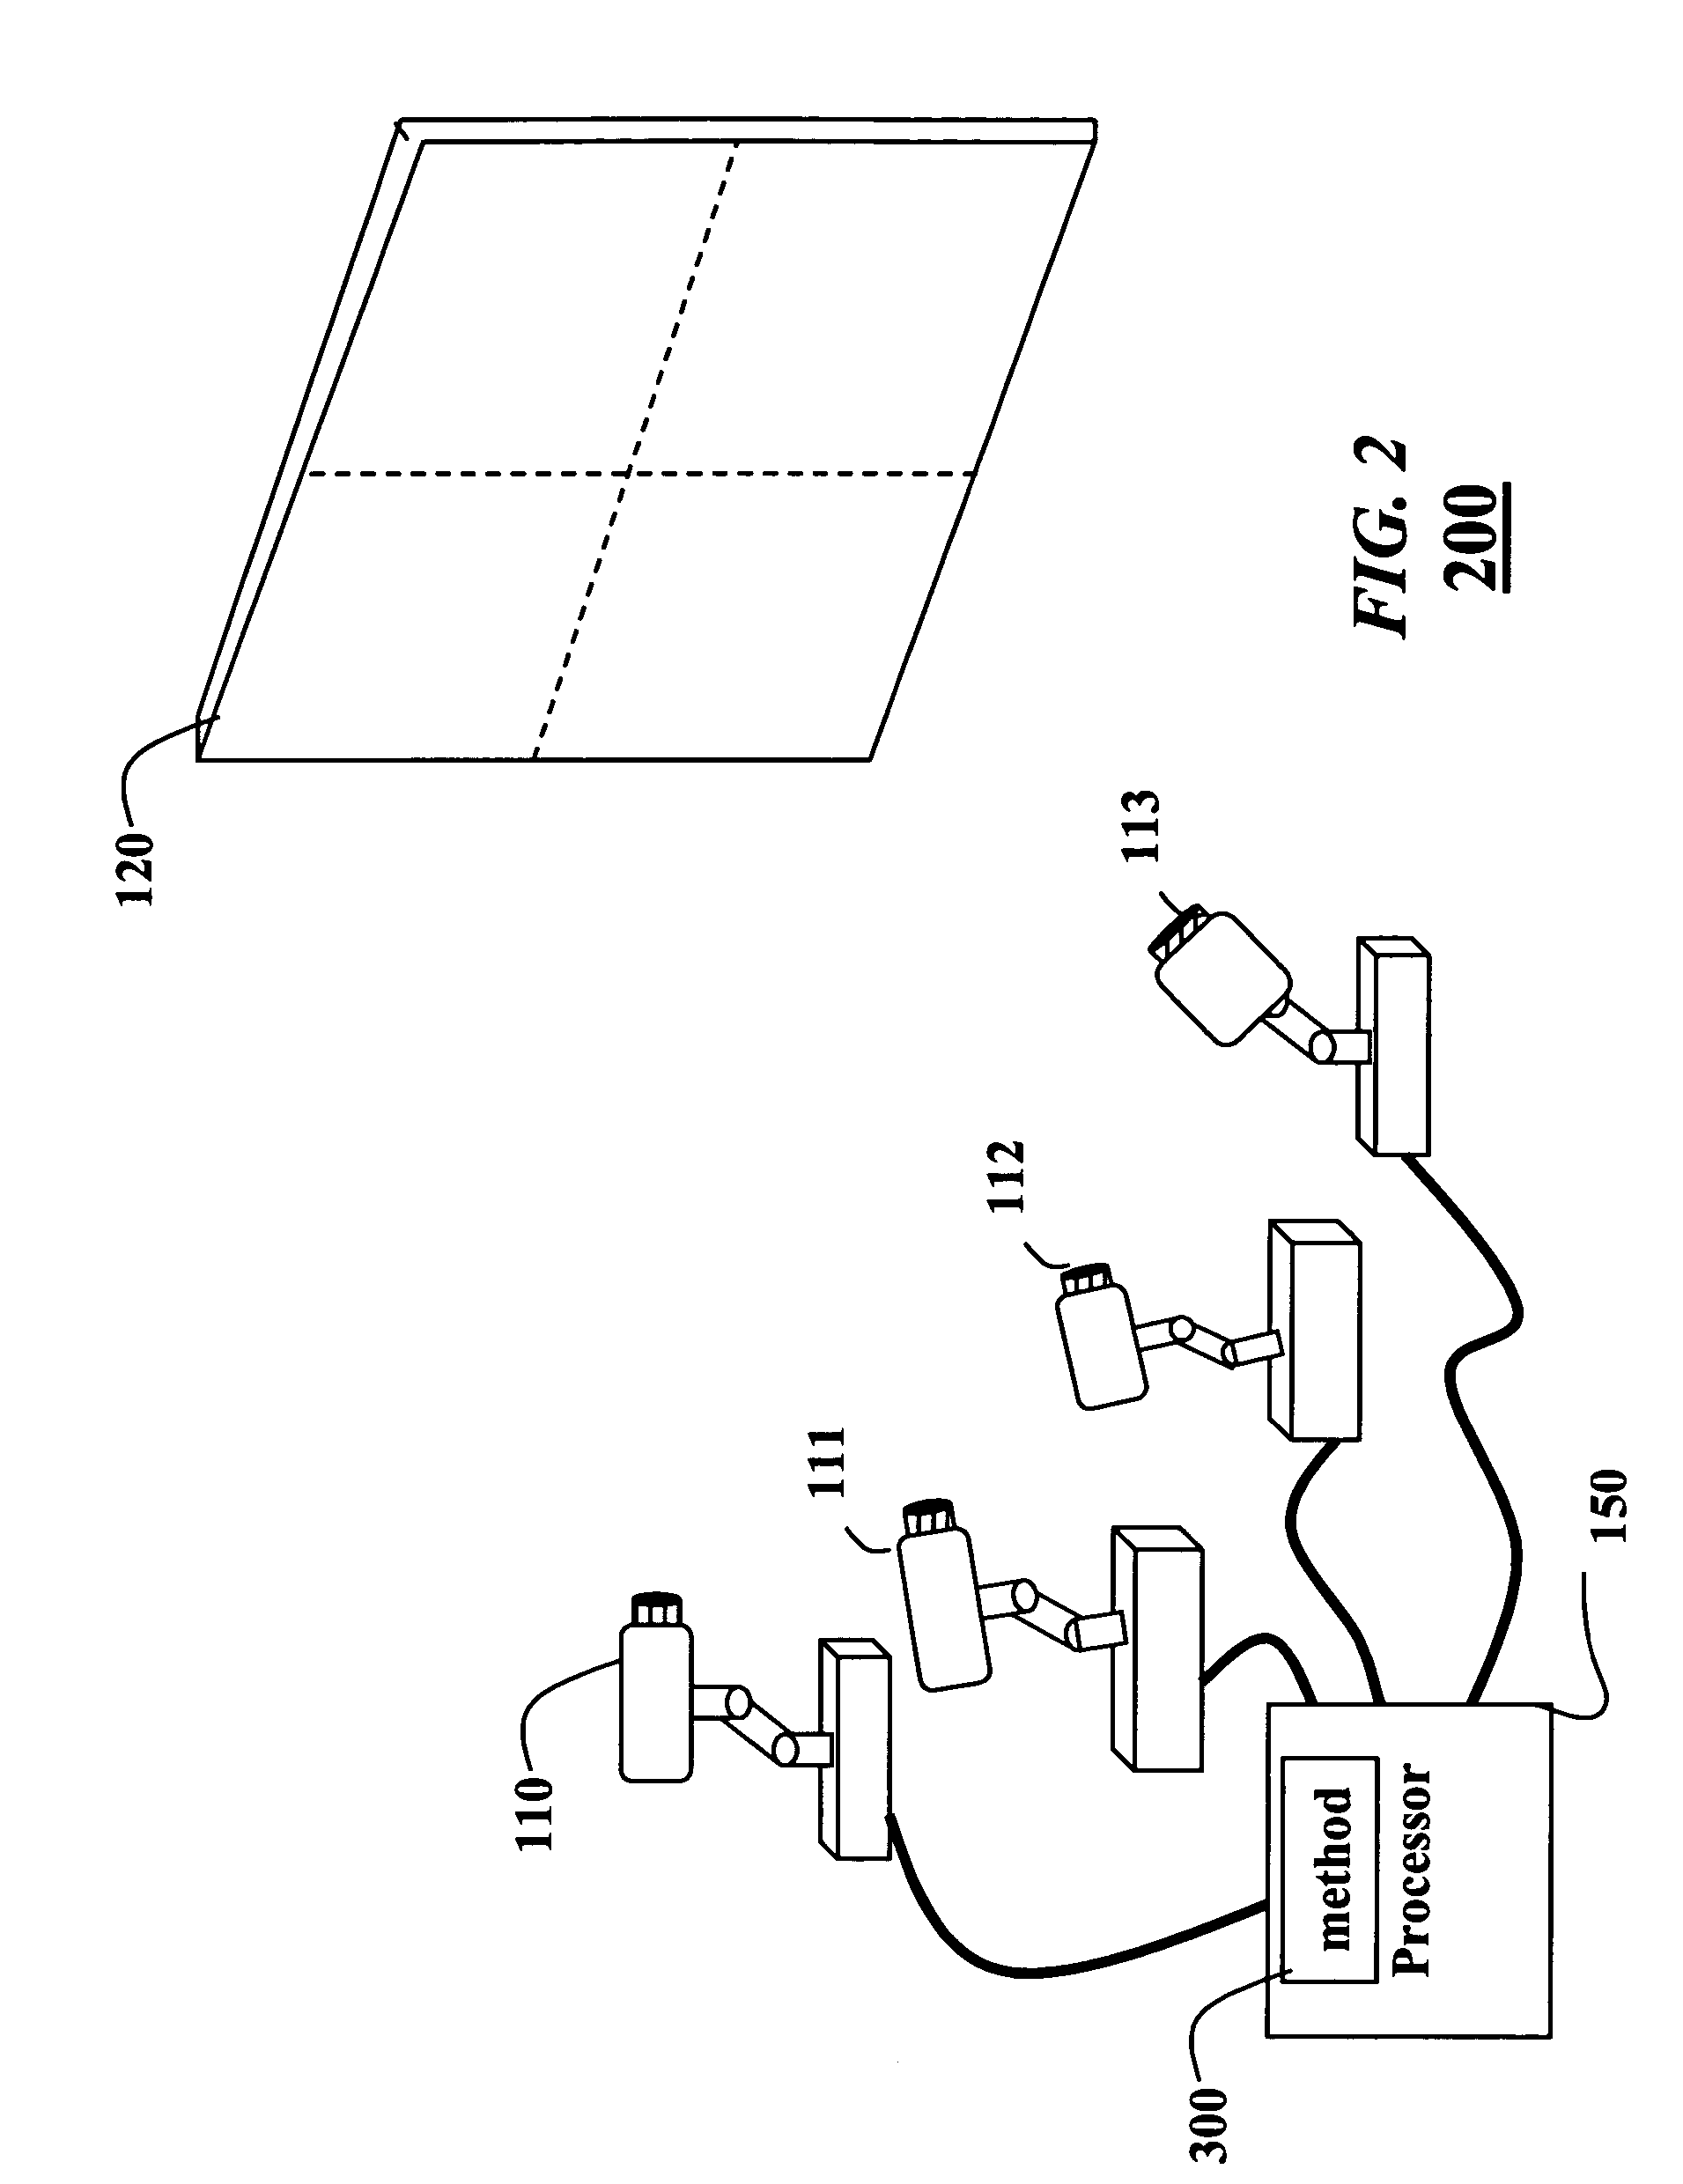 System and method for mechanically adjusting projector pose with six degrees of freedom for image alignment